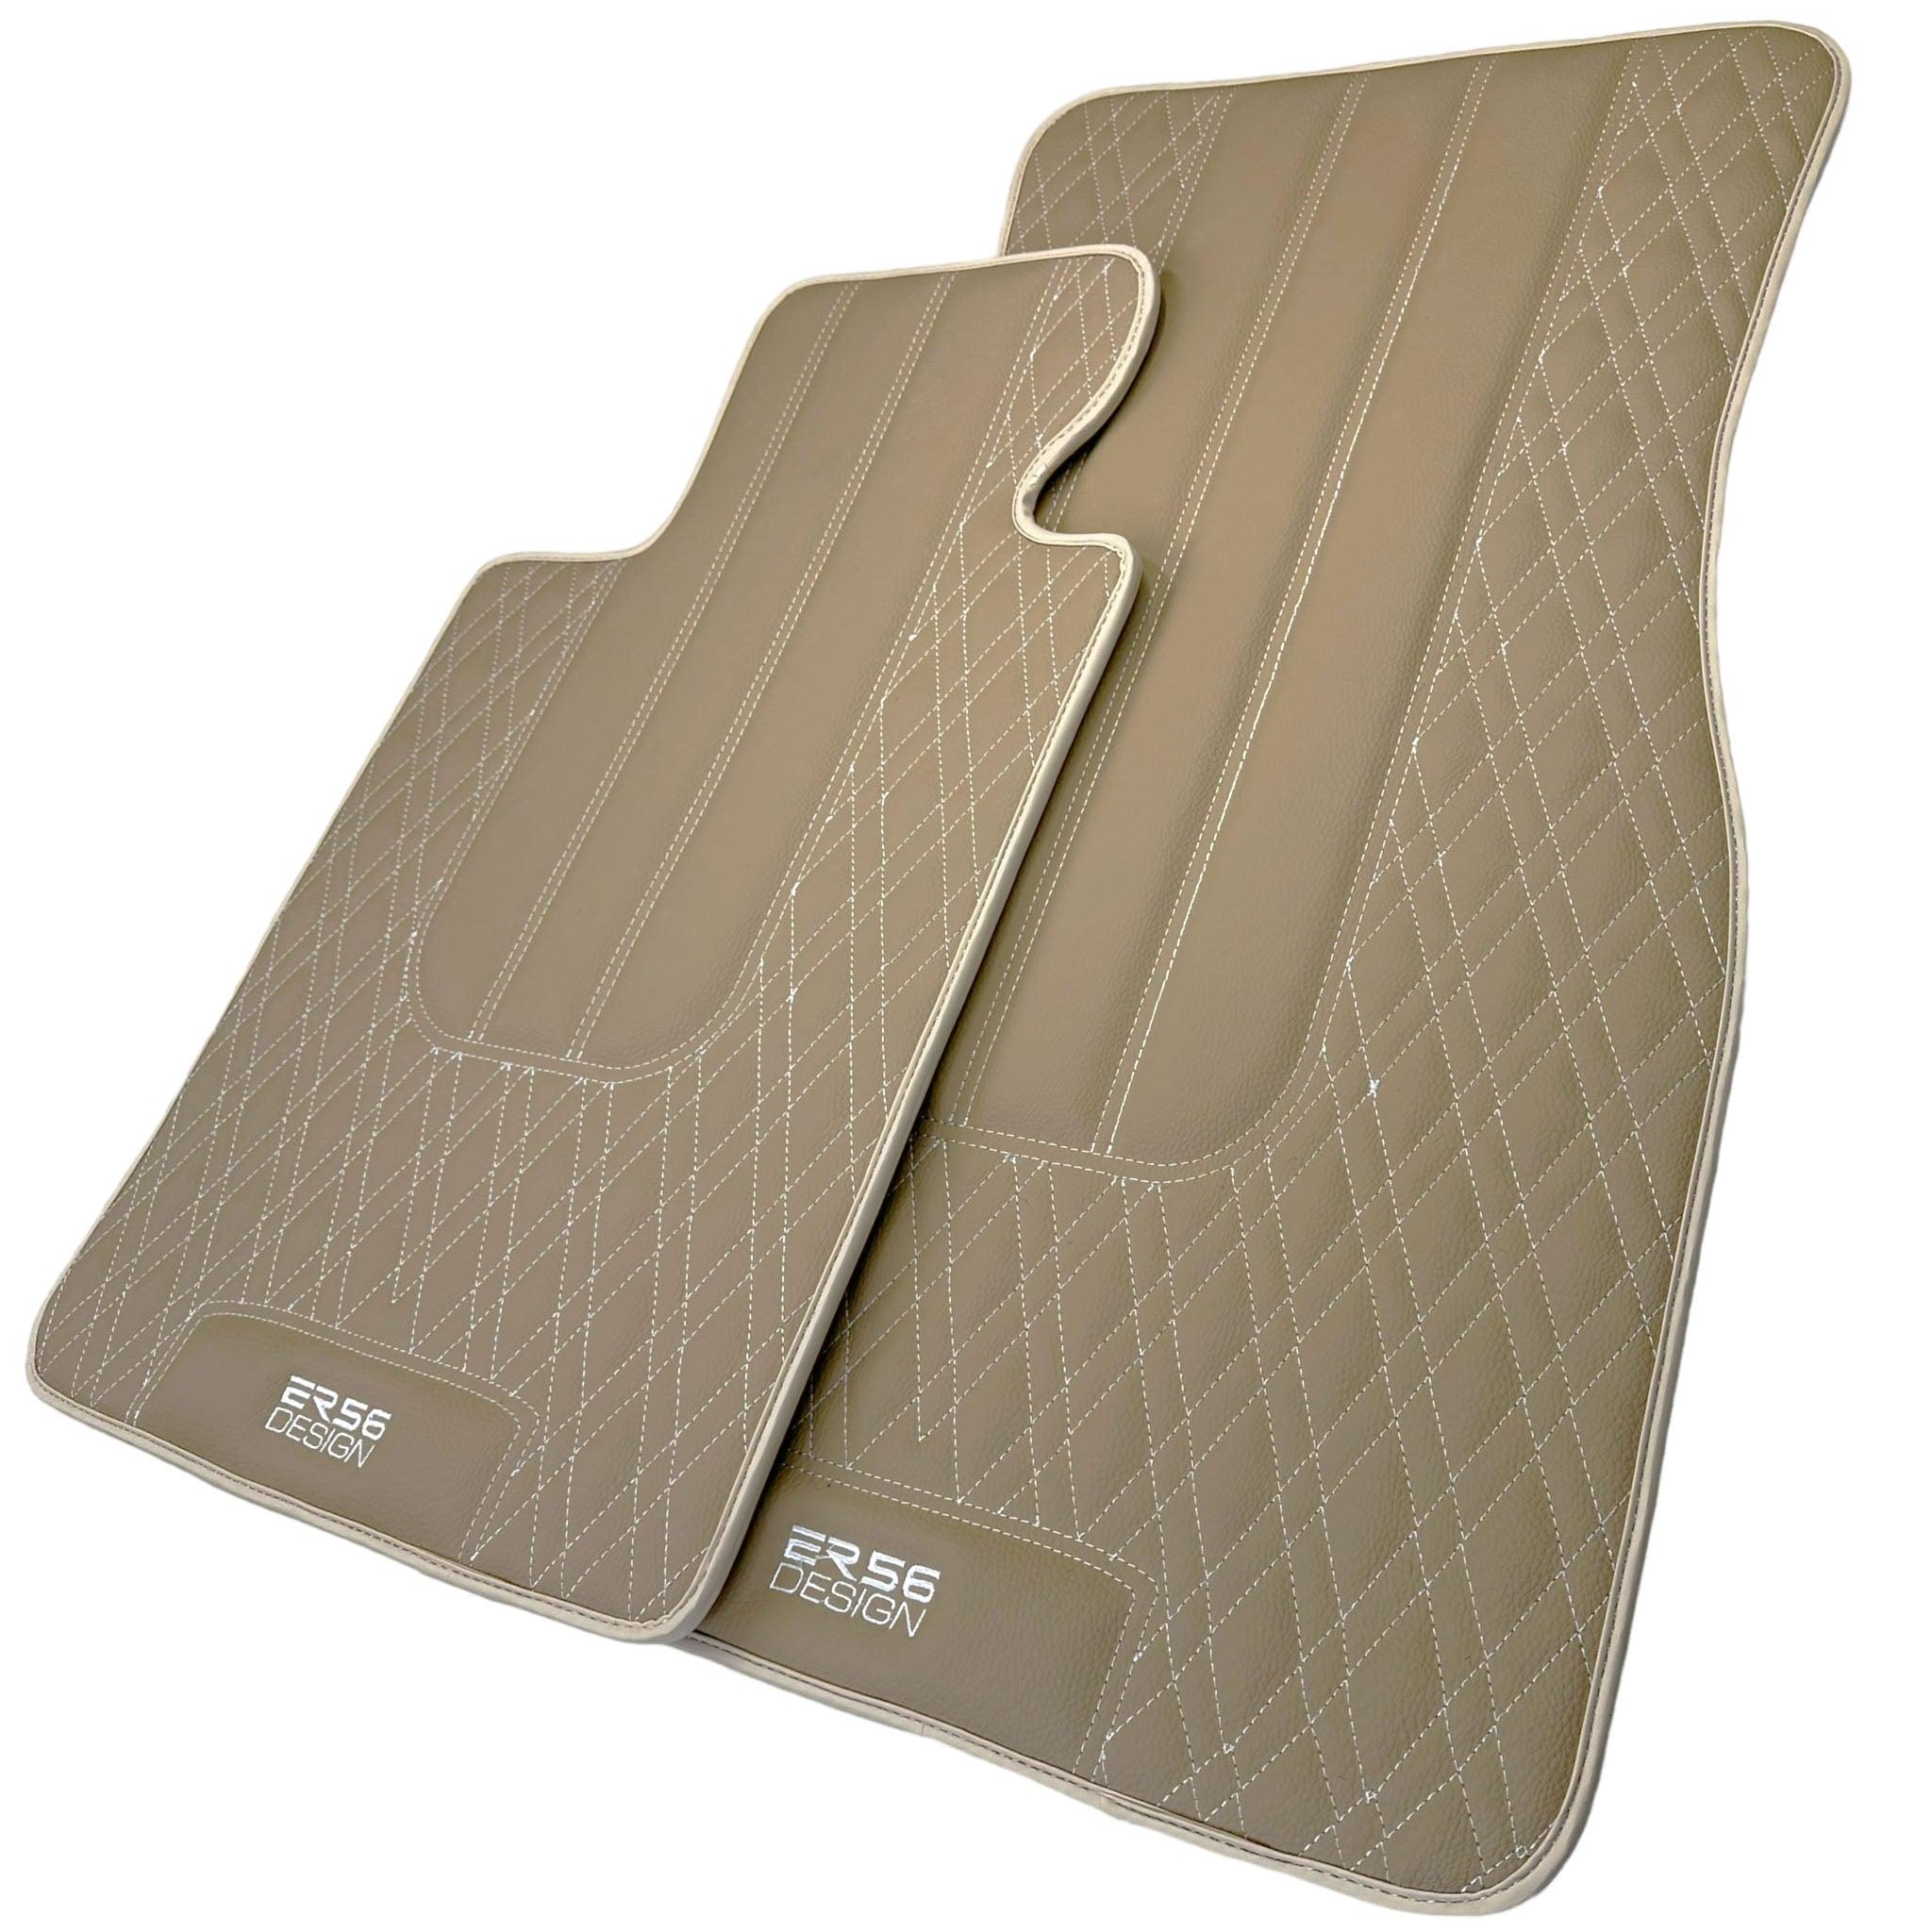 Beige Leather Floor Mats For BMW M5 F10